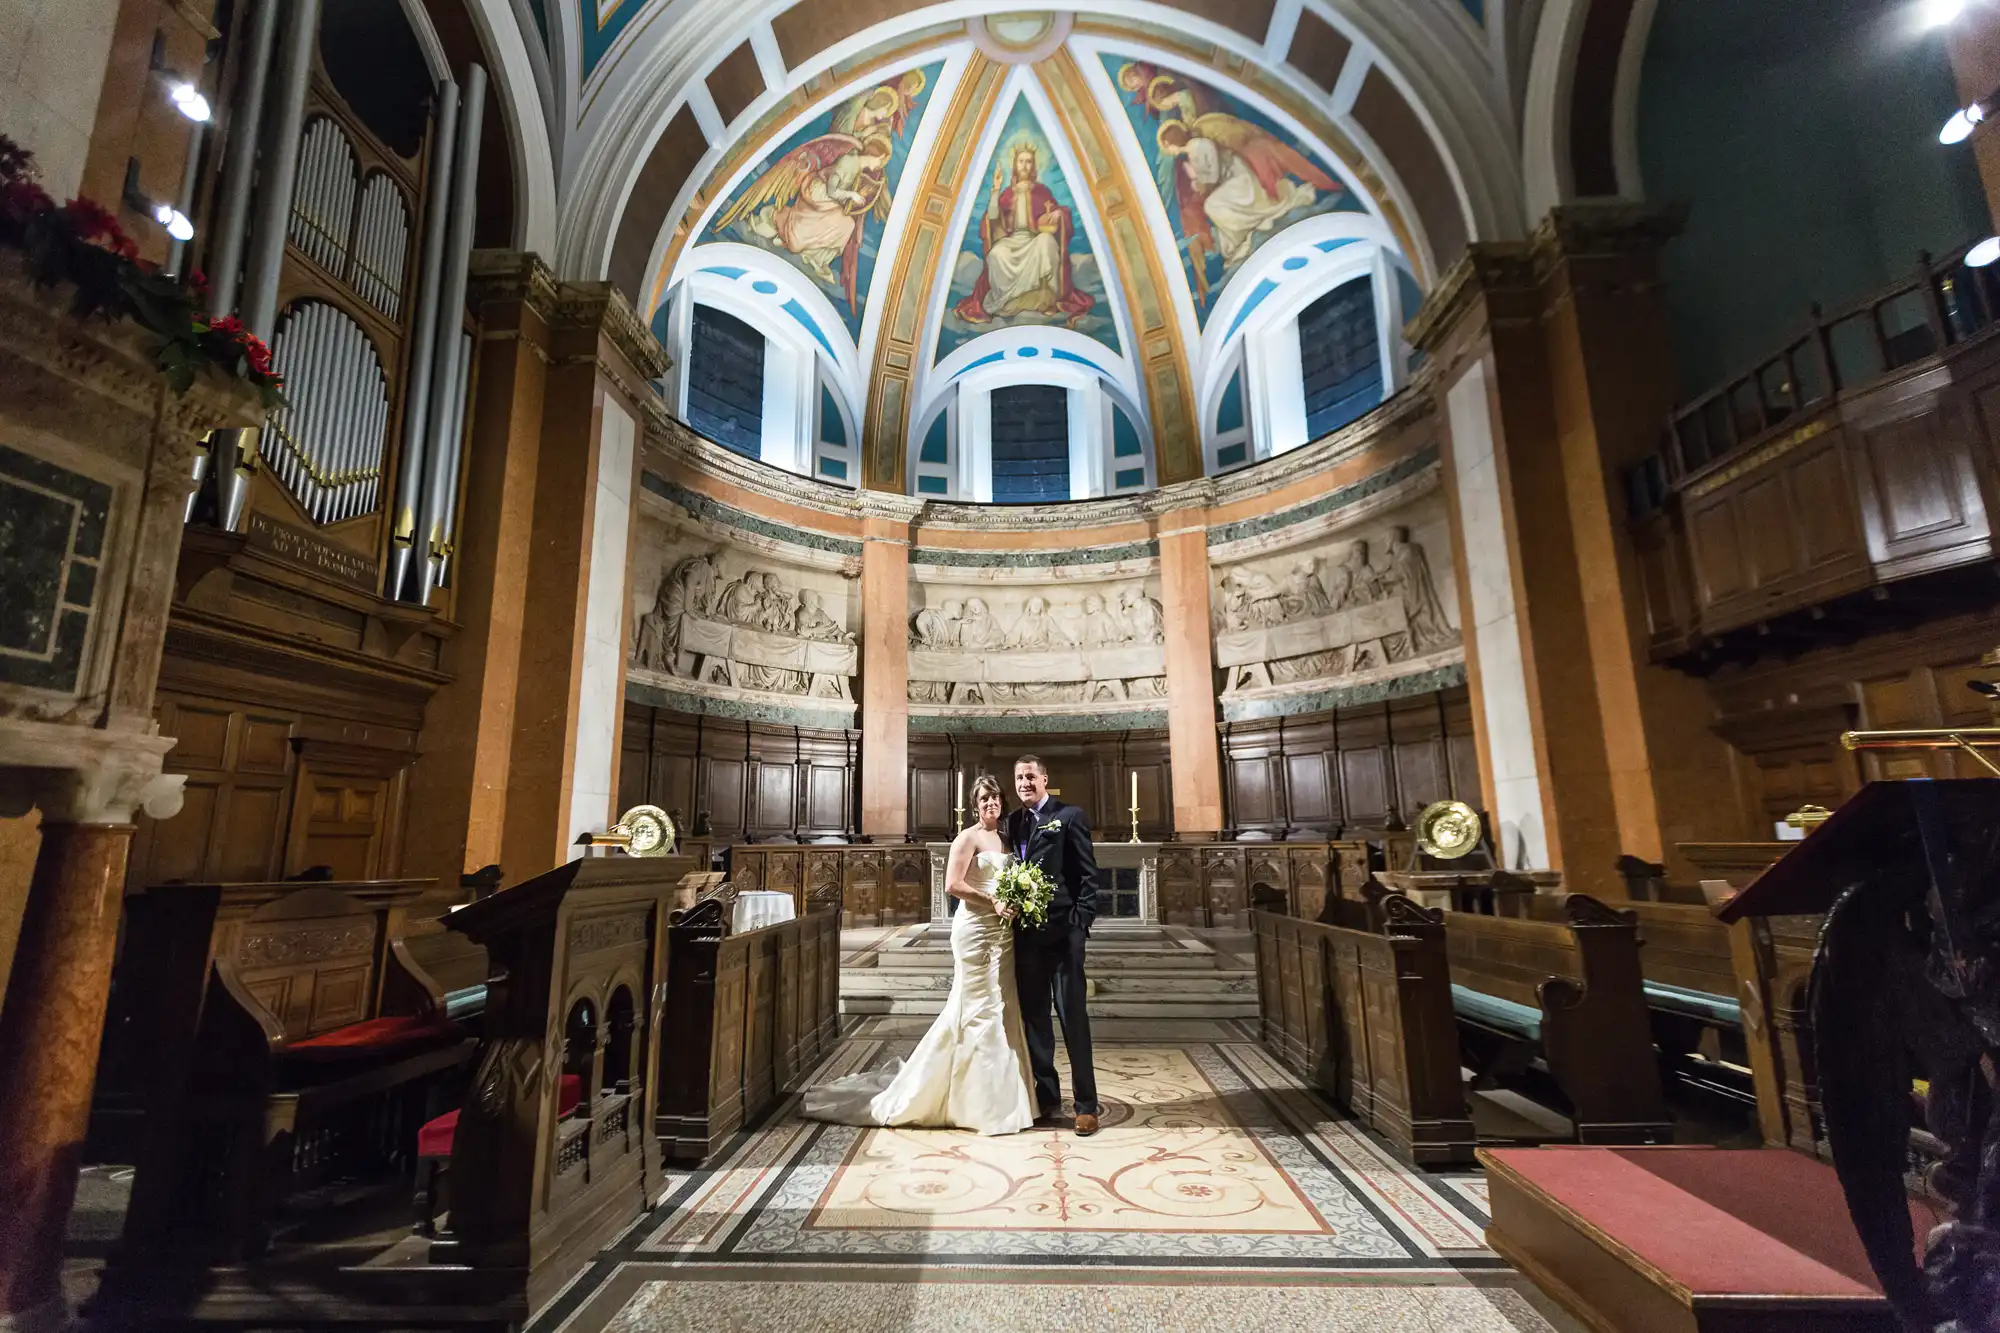 A bride and groom standing in the aisle of an ornate church with painted domed ceilings, colorful murals, and wooden pews.